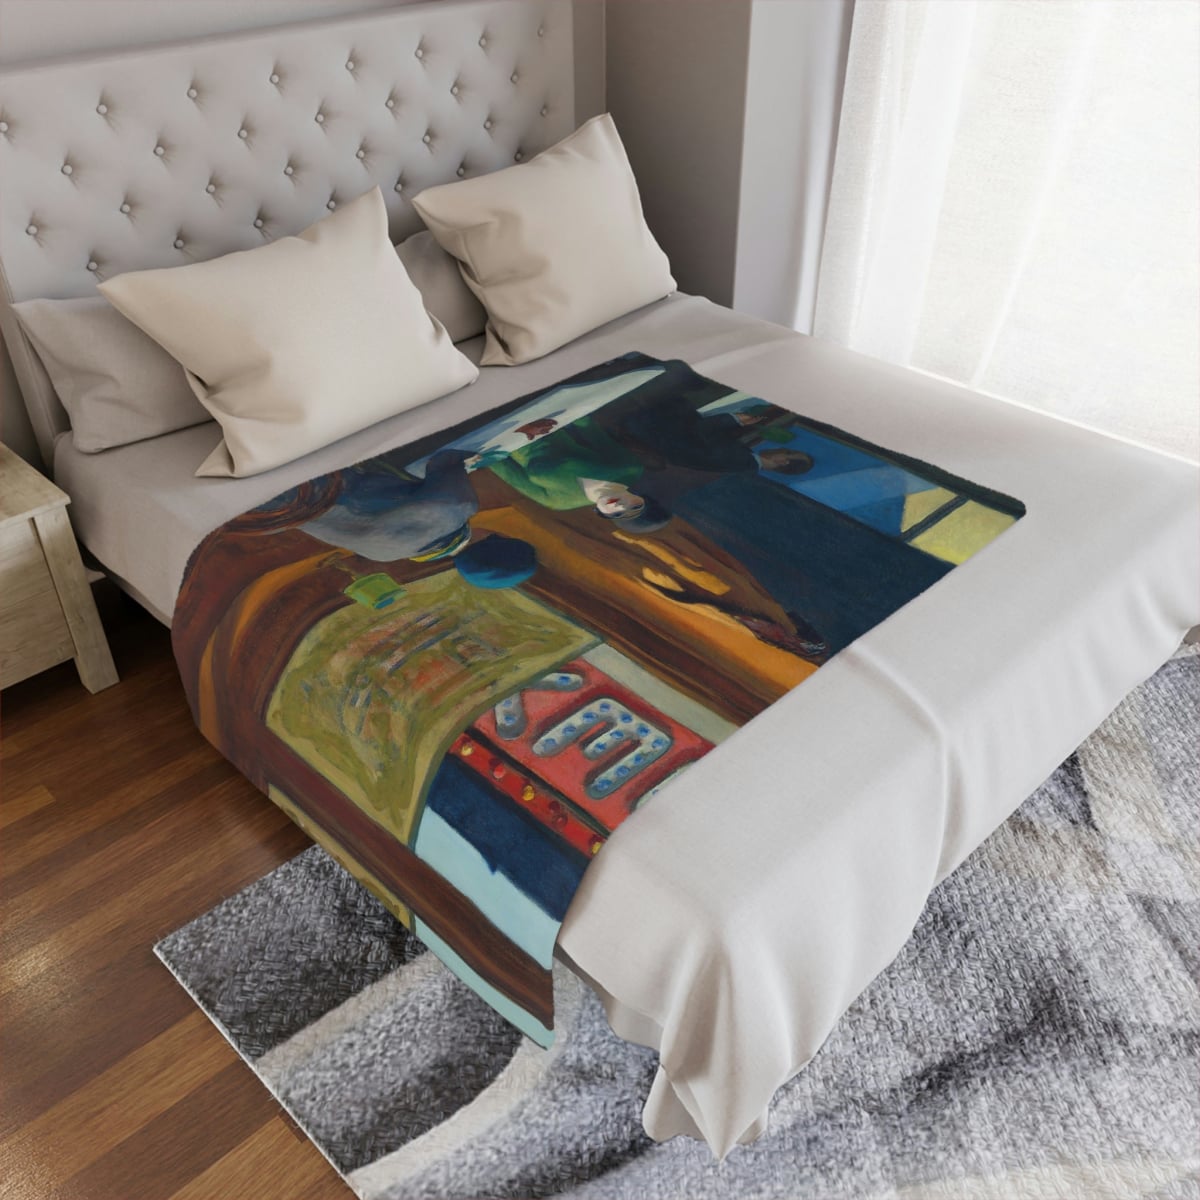 Elevate your space with the luxury and artistry of 'Chop Suey' by Edward Hopper